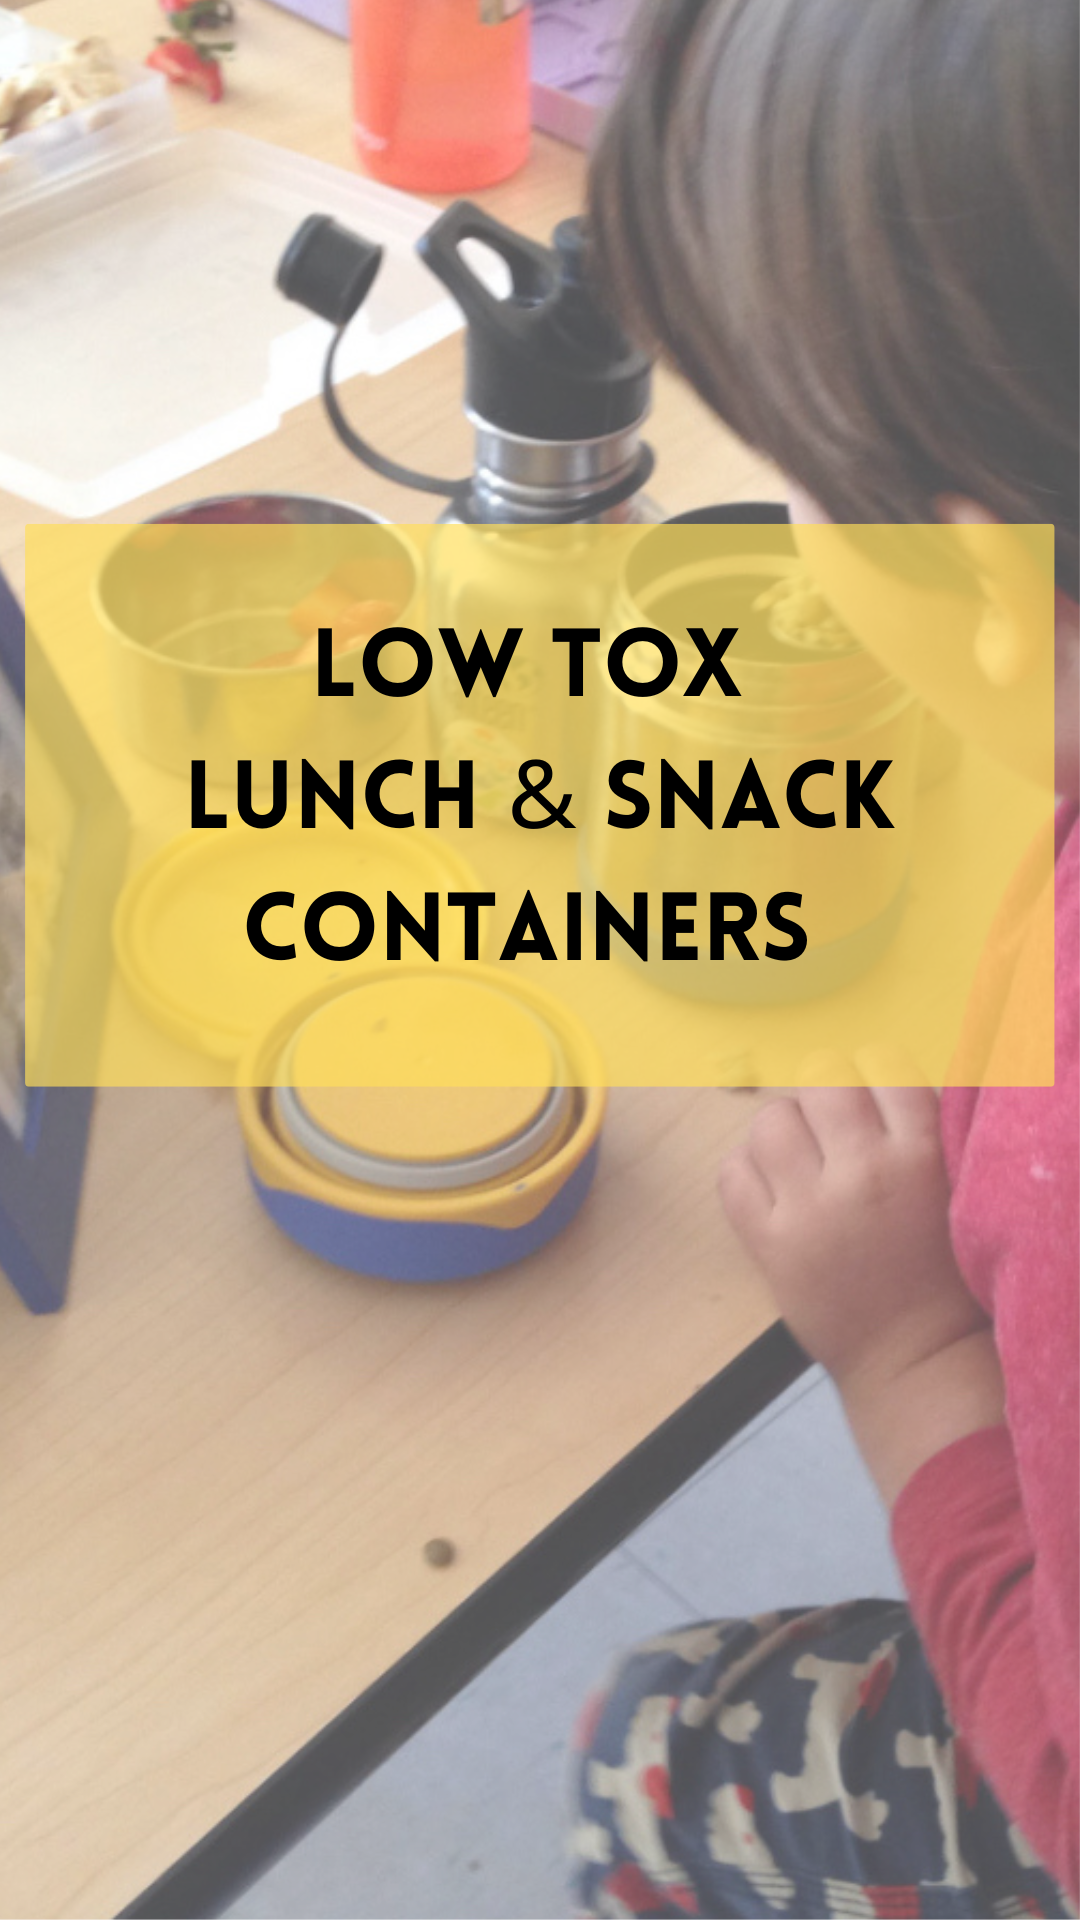 Low Tox Food Containers — 3 Little Plums